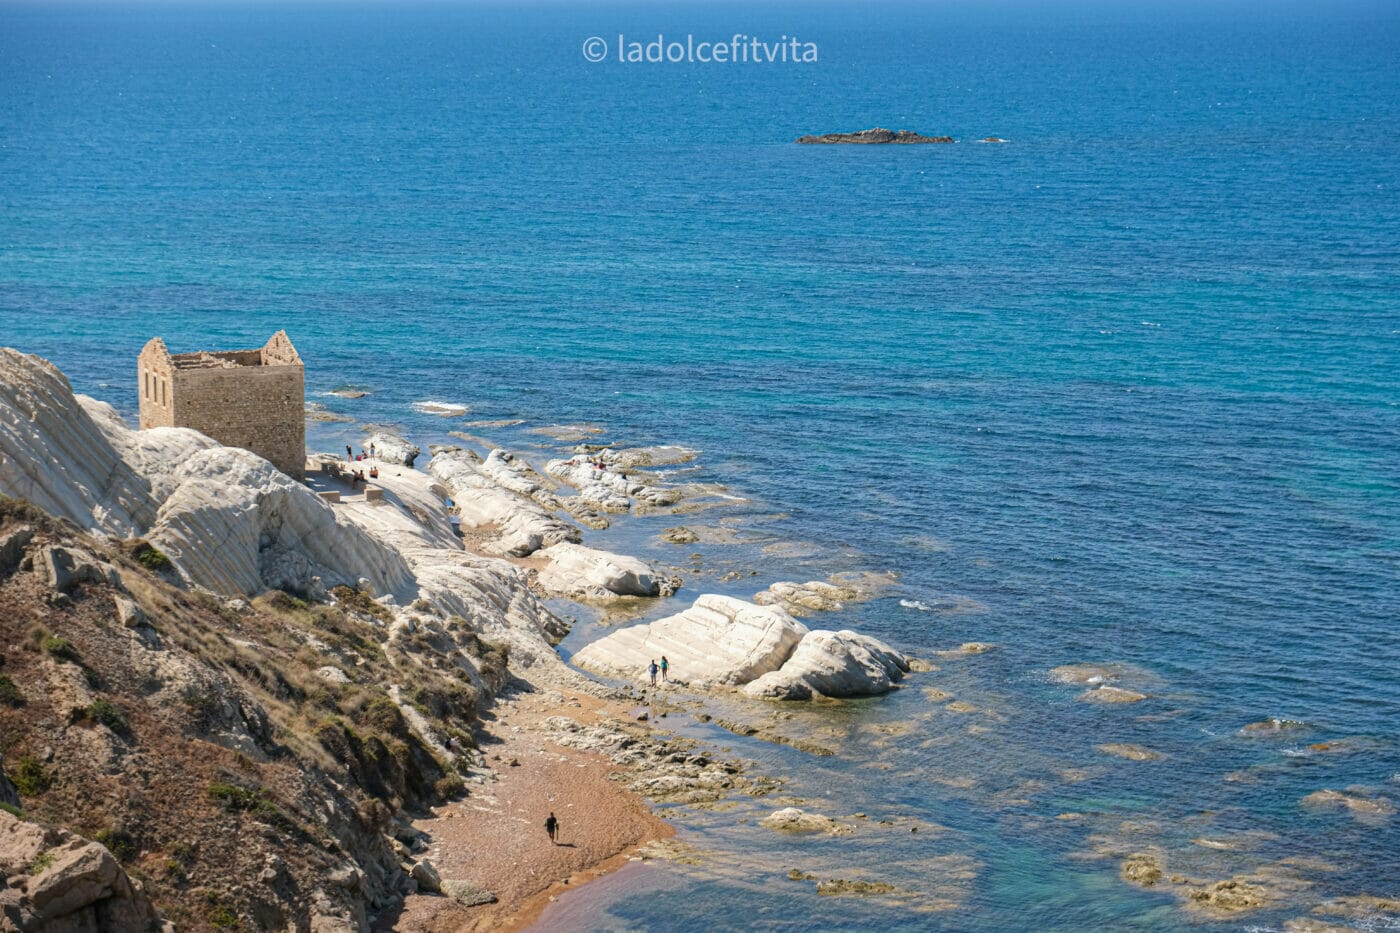 A building in ruins standing on a white calcareous cliffside on the shores of Punta Bianca beach in Agrigento, Sicily